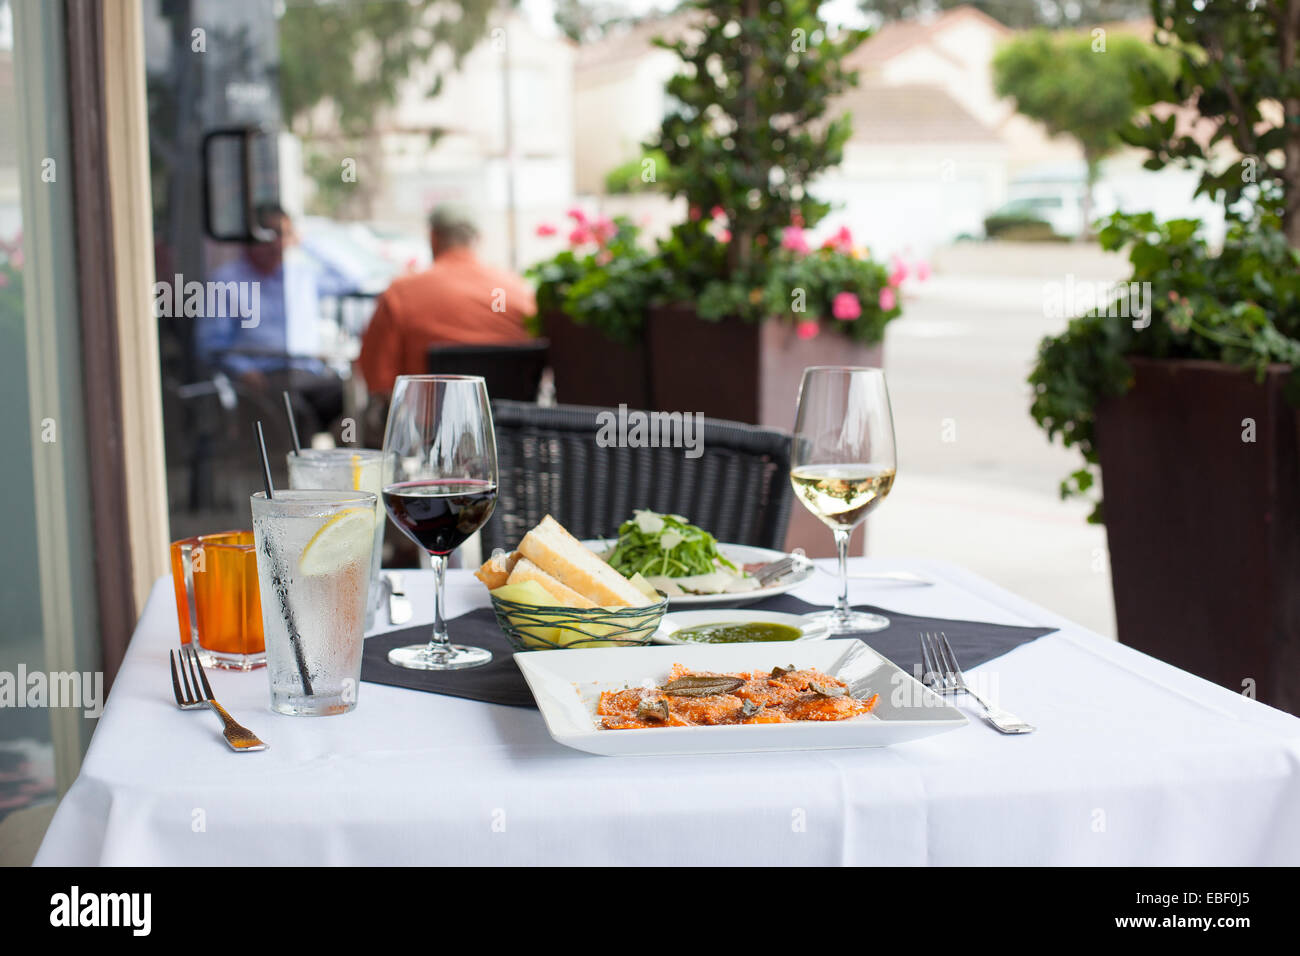 Patio table at a cafe with italian meal Stock Photo